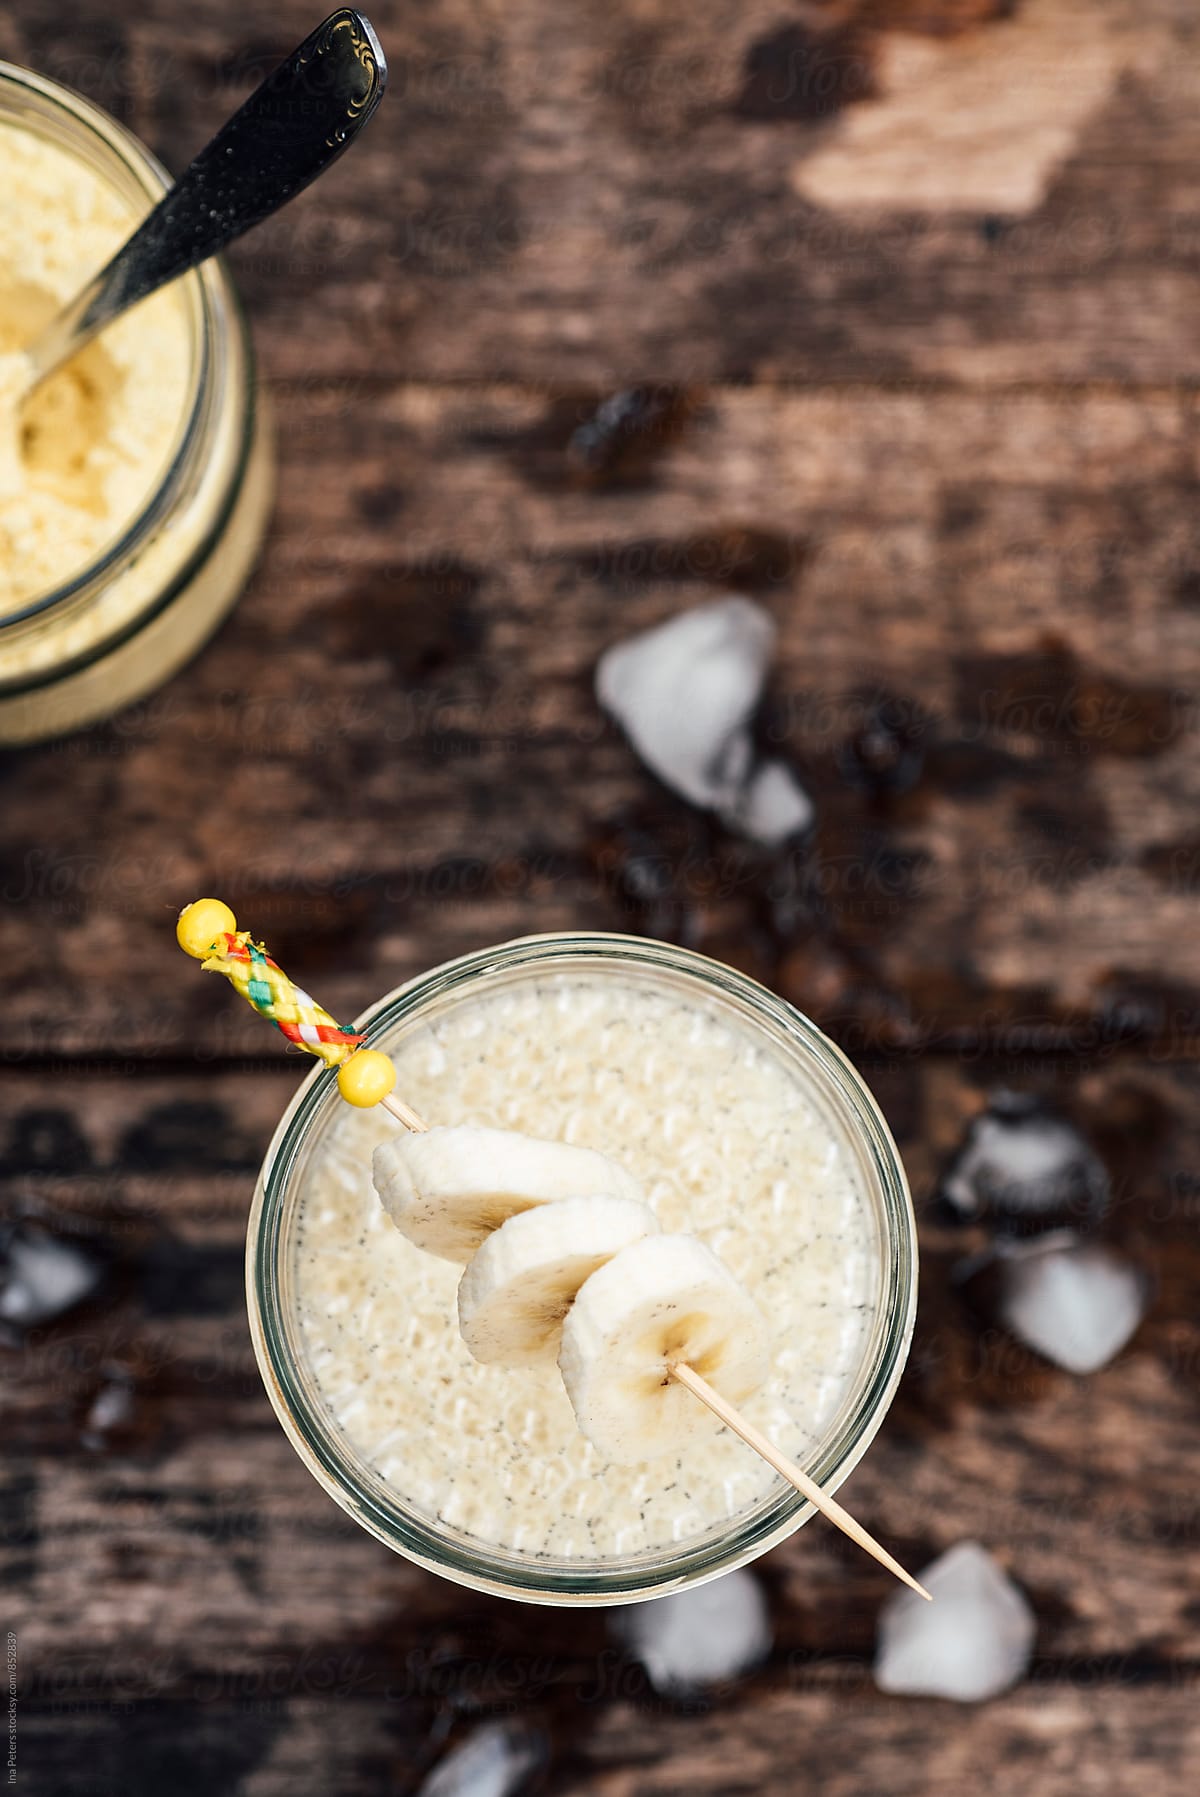 Food: Vegan Protein Drink with Soy milk, lupins flour, banana, vanilla and ice cubes